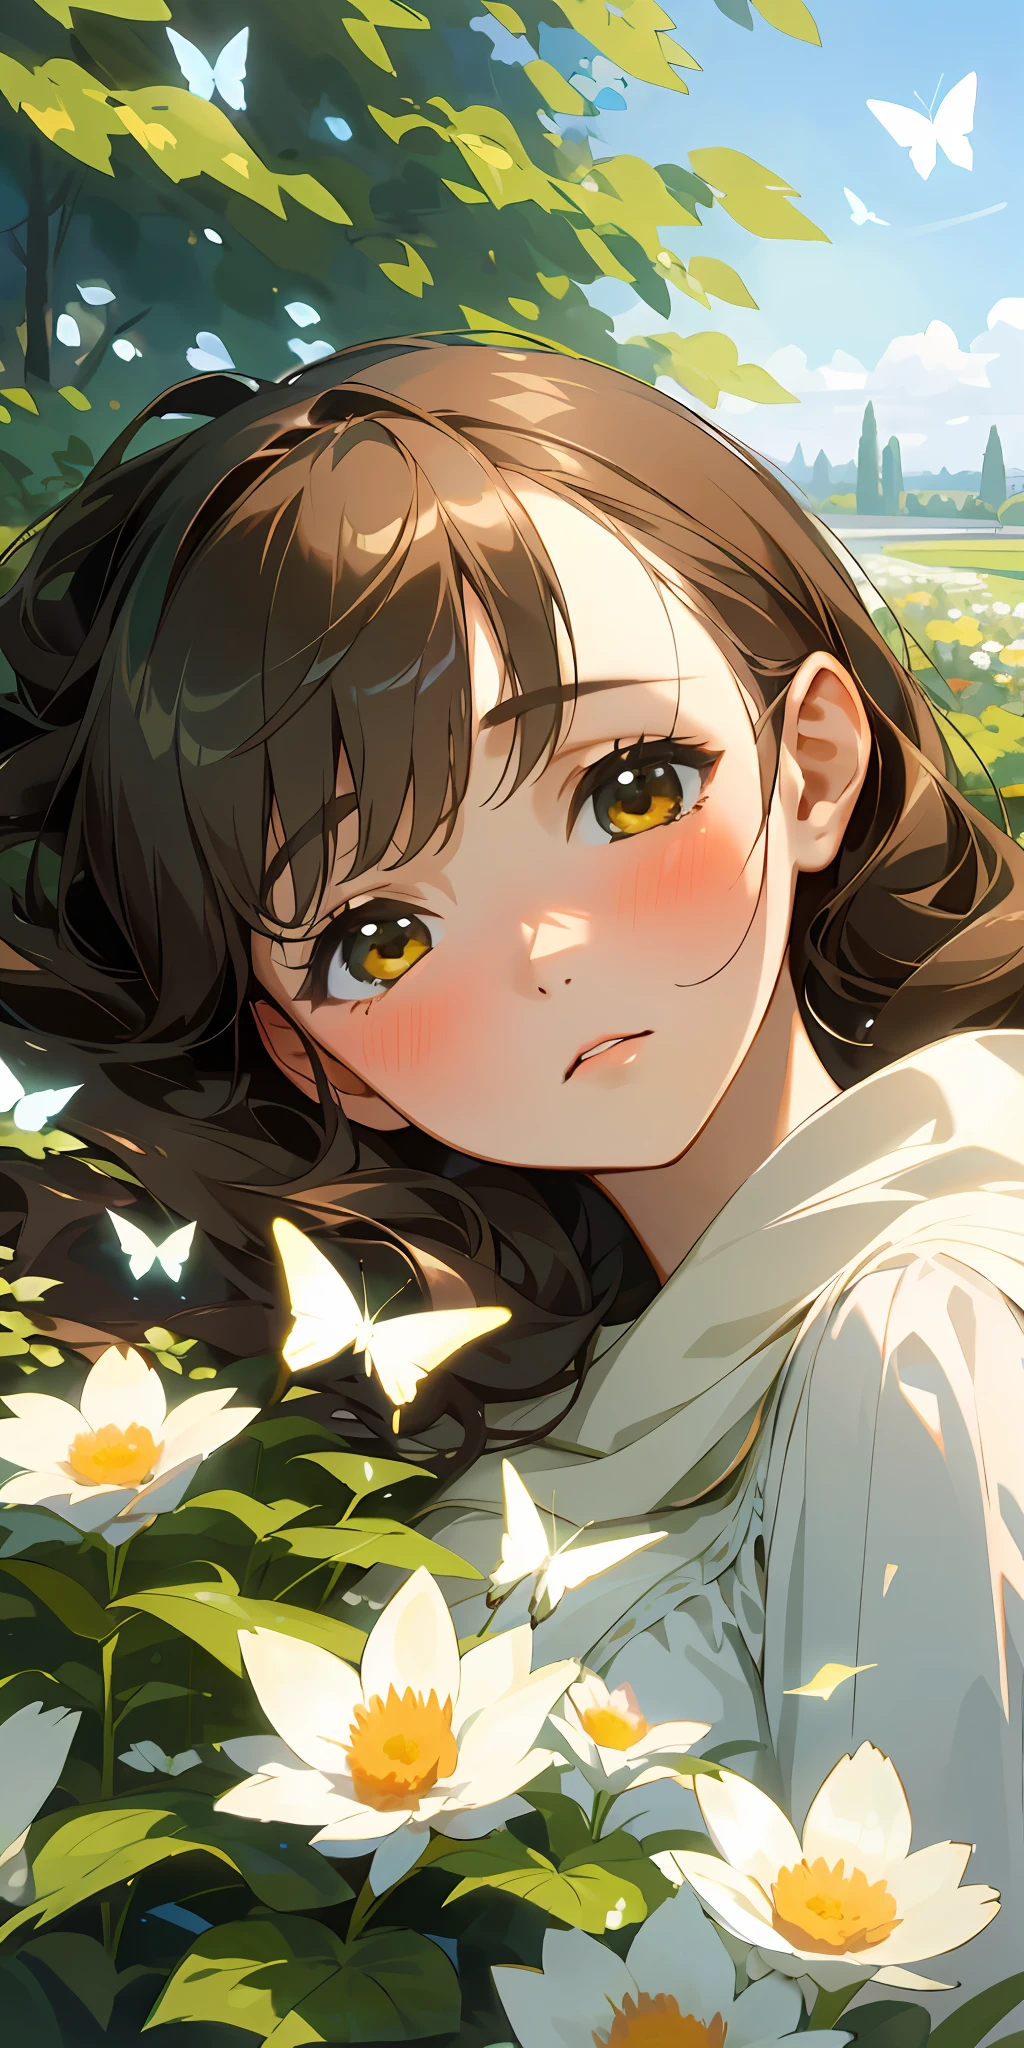 (top quality, masterpiece, ultra-realistic), one beautiful delicate portrait of a girl with a soft and sad expression, the landscape in the background is a garden with flowers and butterflies flying around. --v6